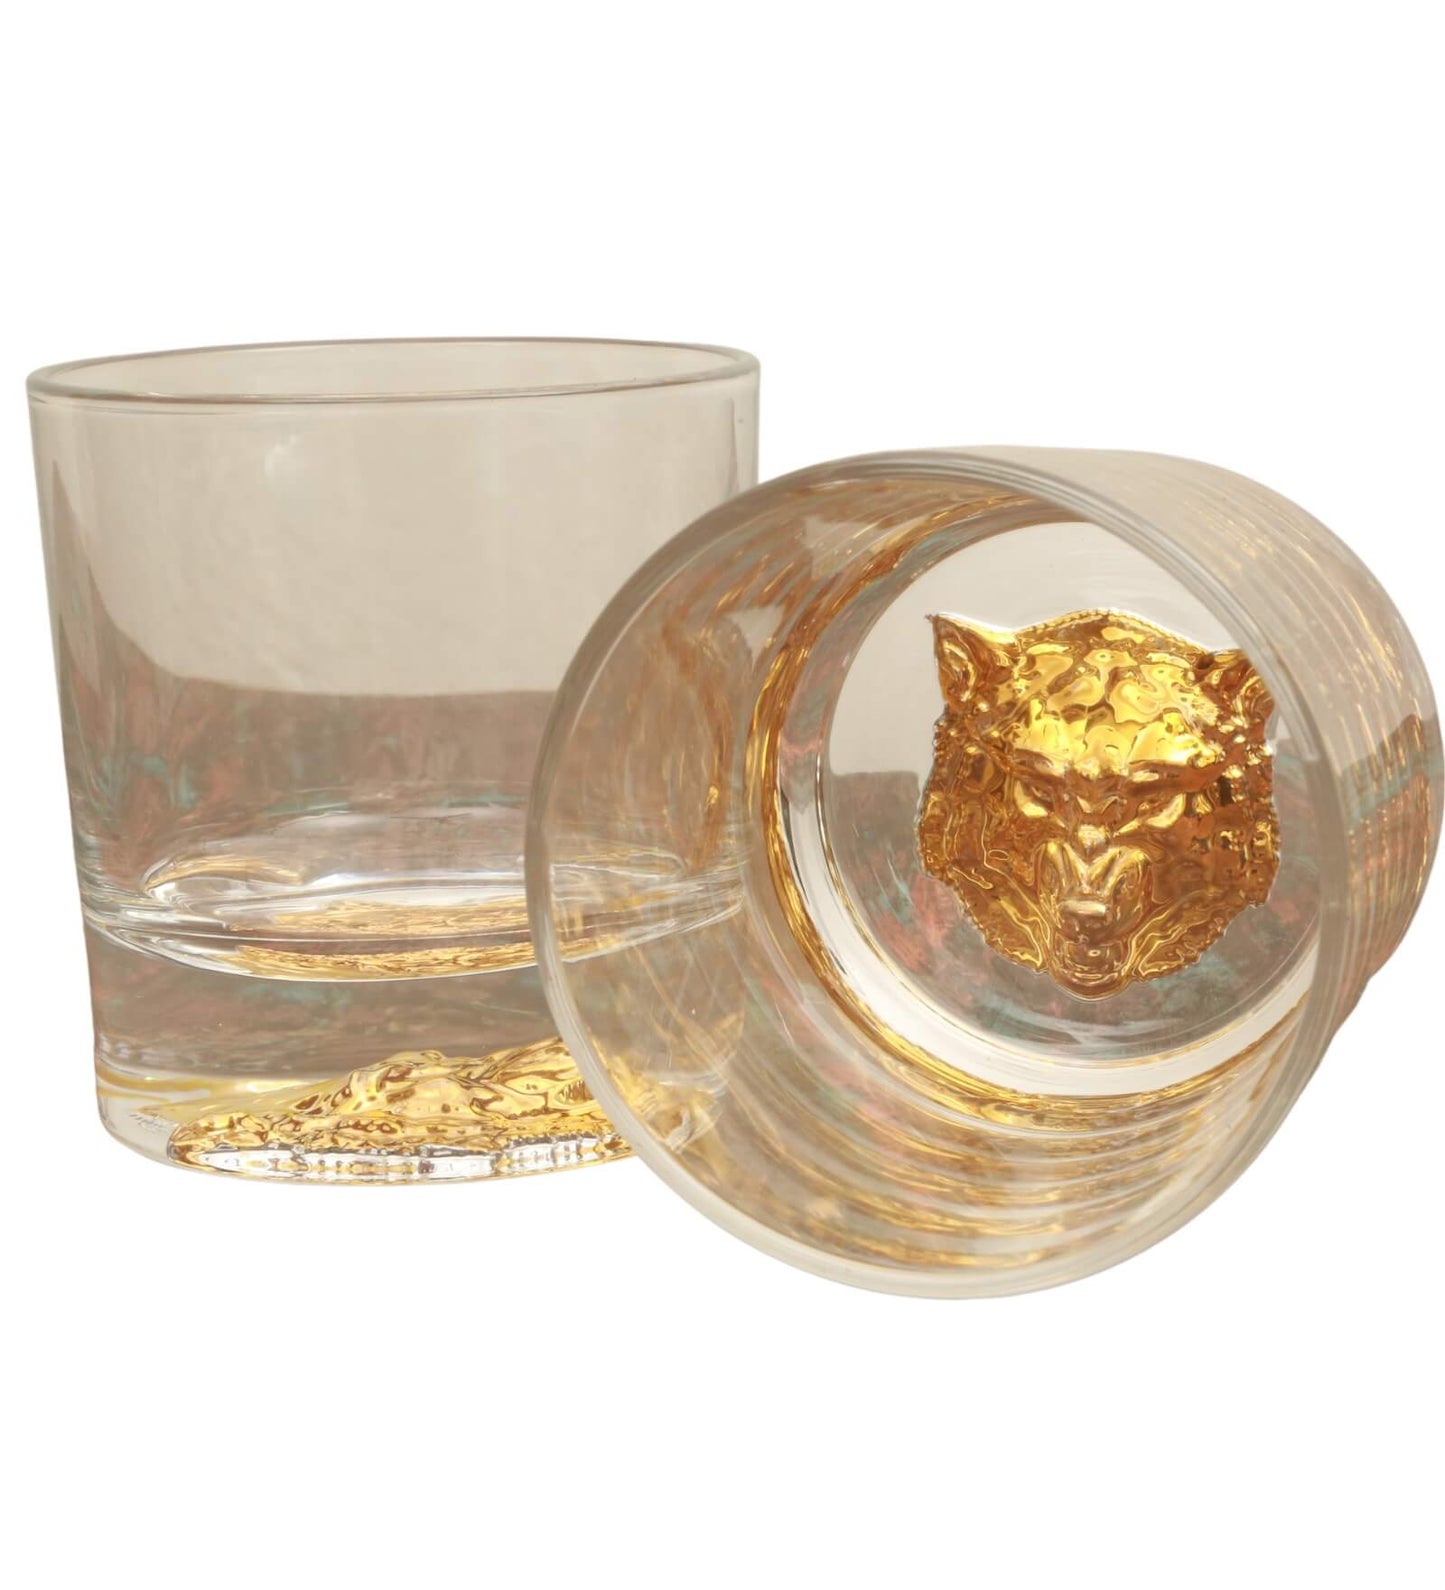 Melbify Unusual Gold Wolf Label Whiskey Glasses My Store Whiskey Glasses